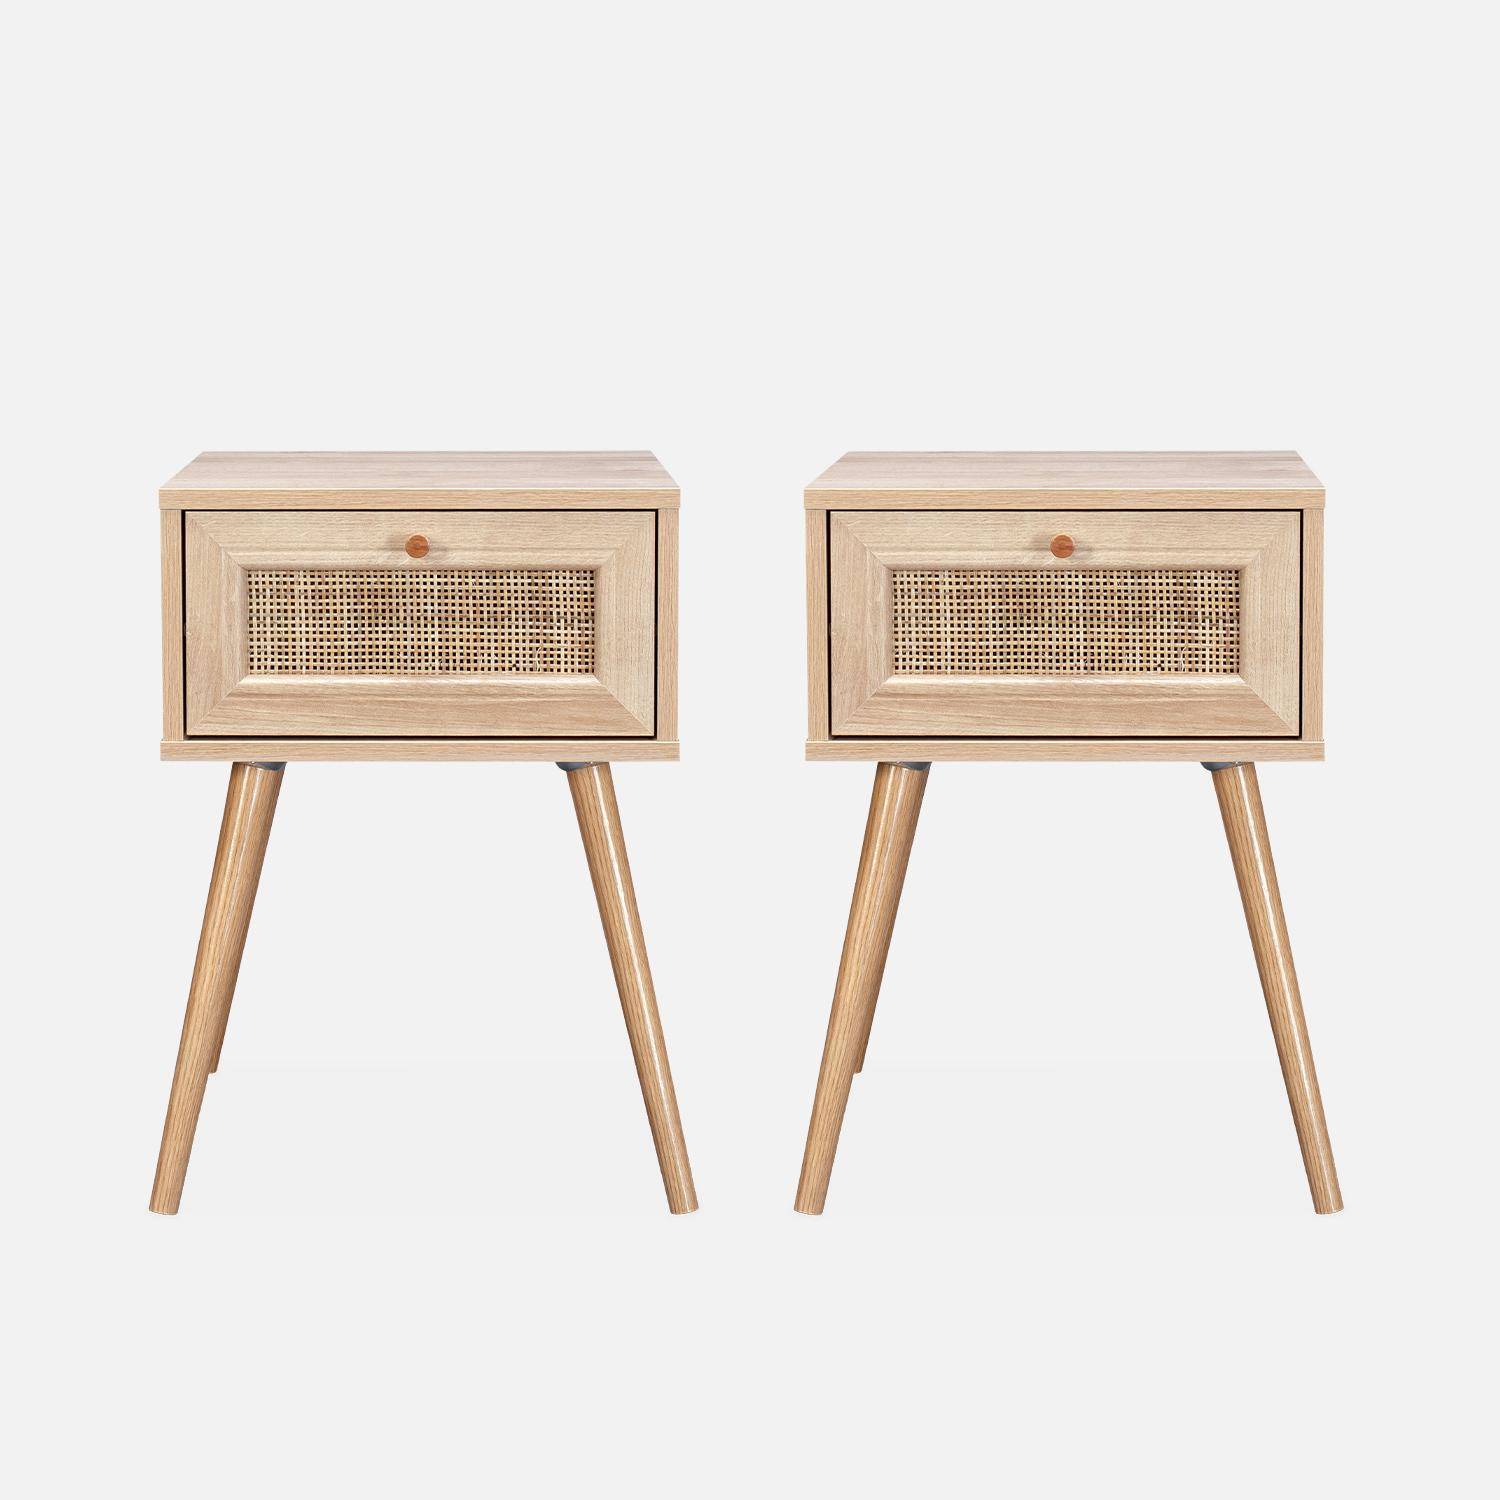 Pair of woven rattan bedside tables with drawer, 39x39x55.4cm - Boheme - Natural Wood colour Photo4